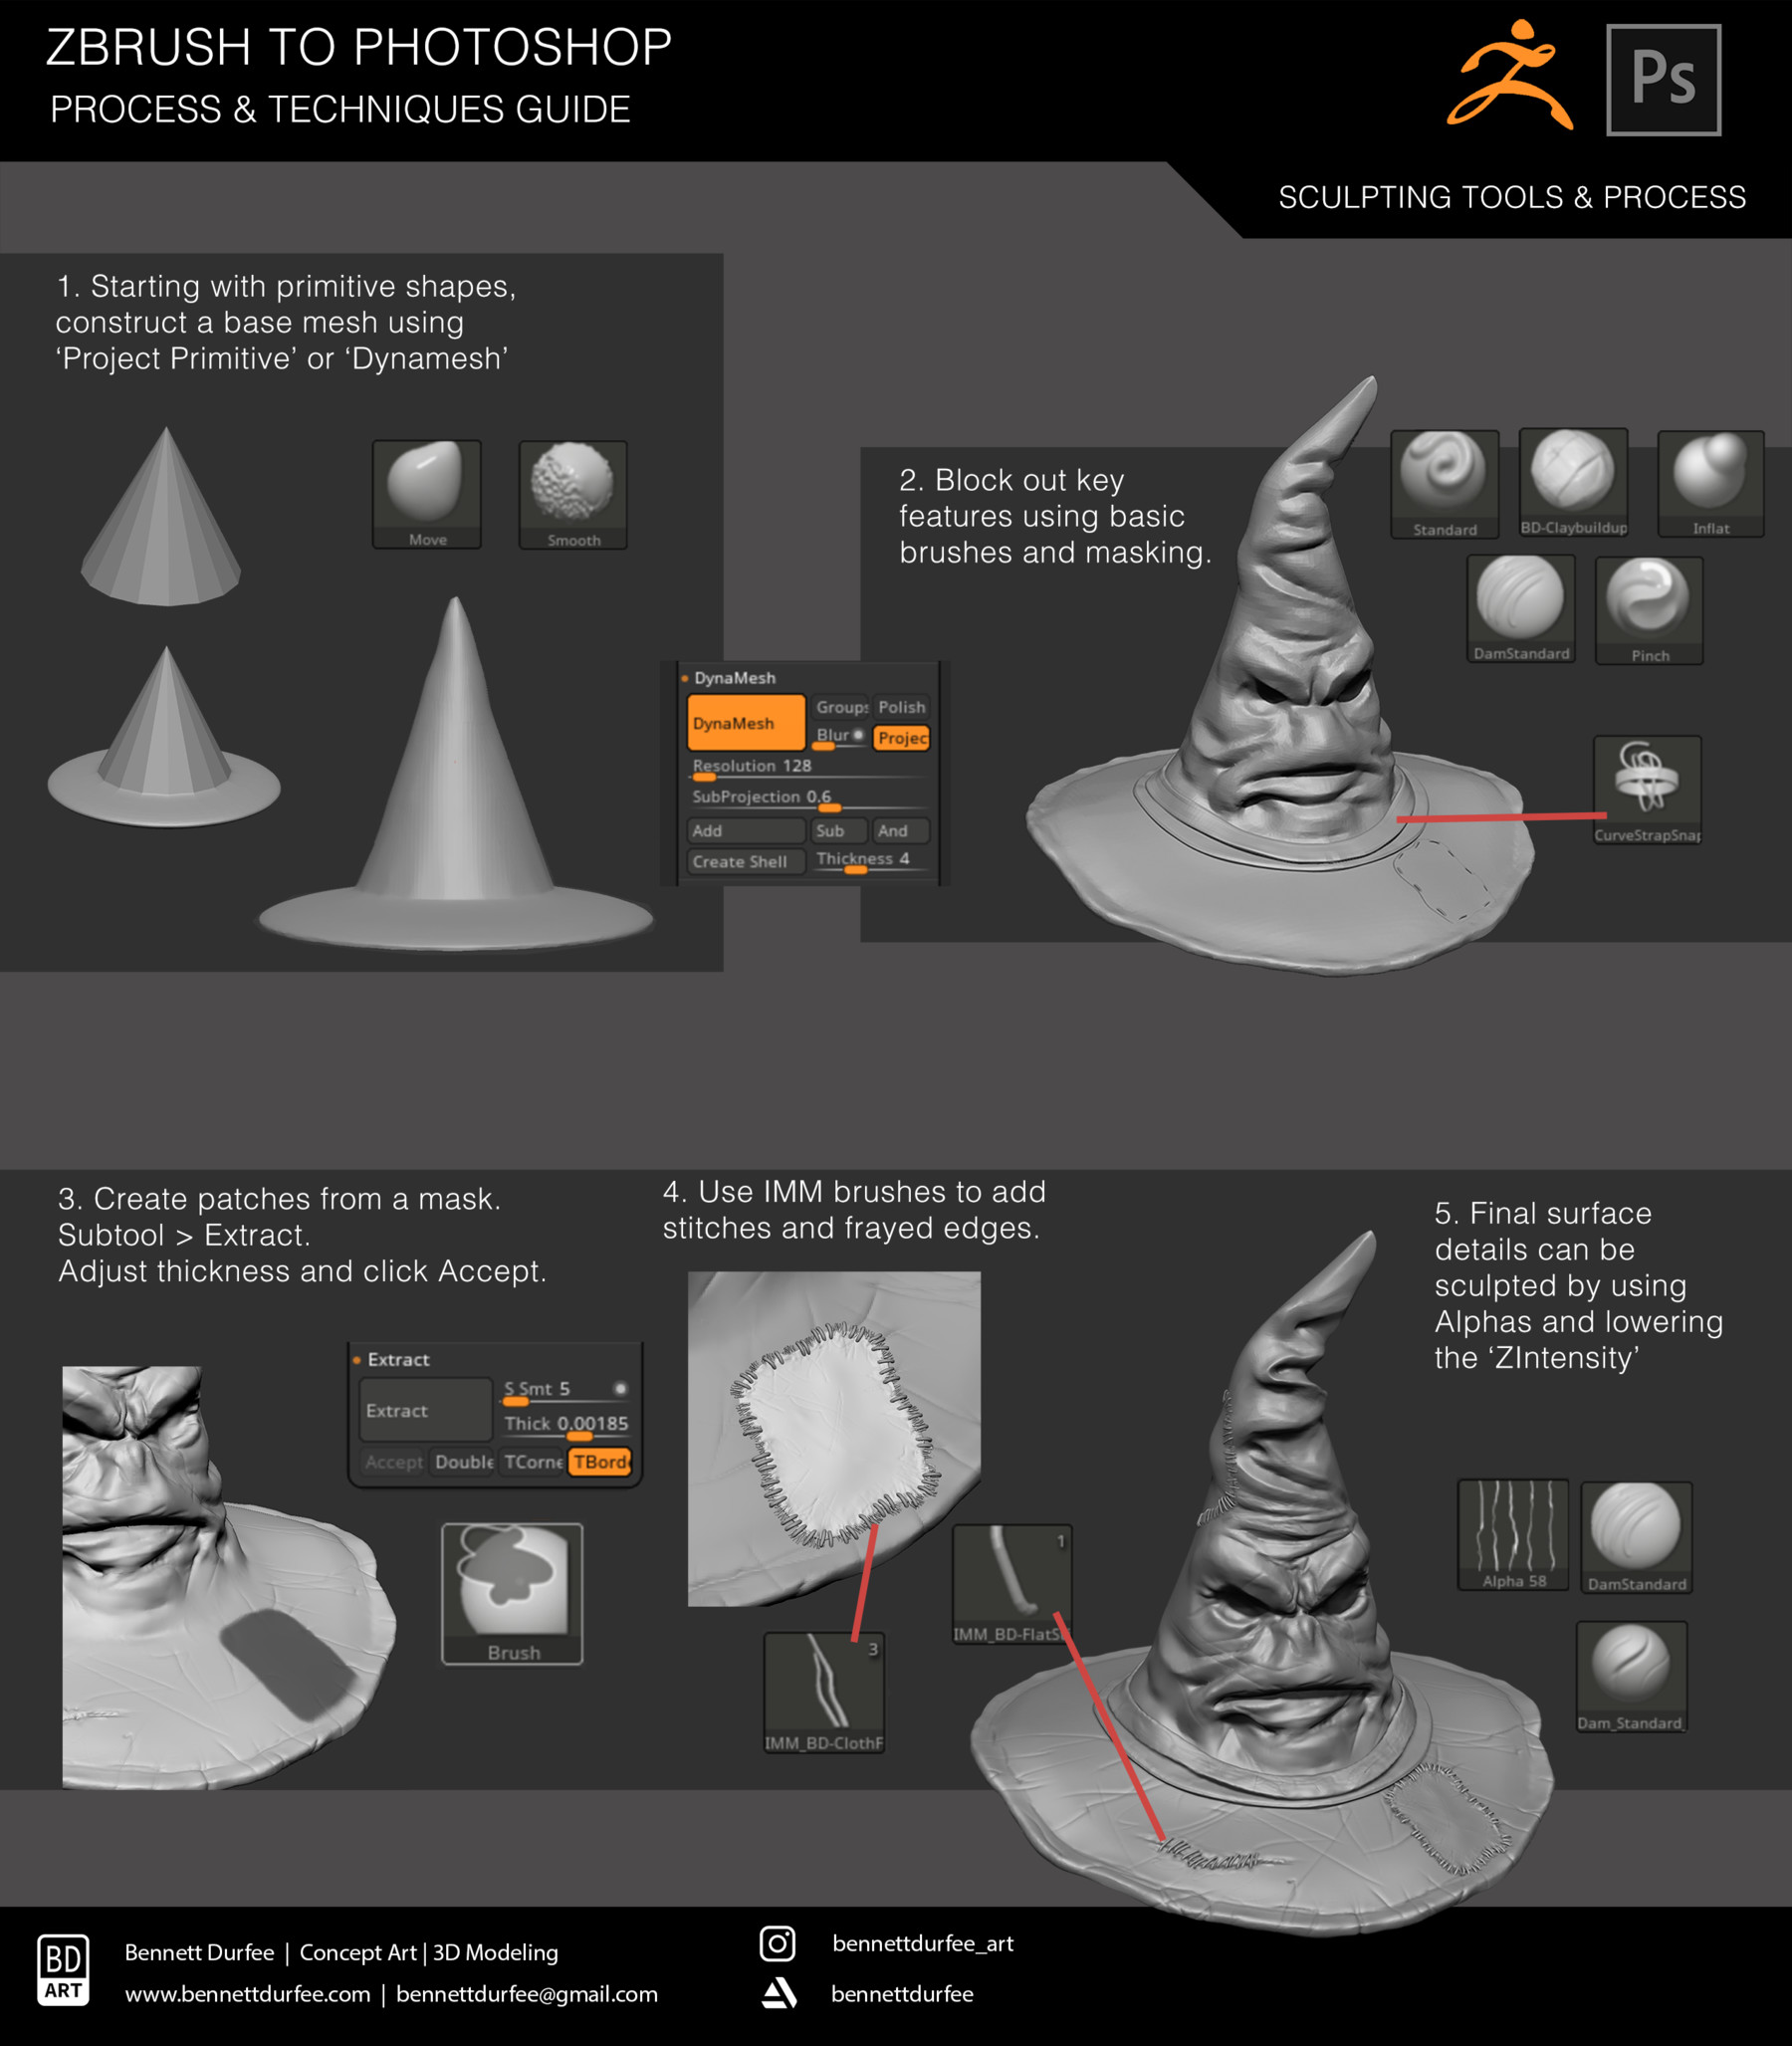 zbrush 2018 to photoshop not working